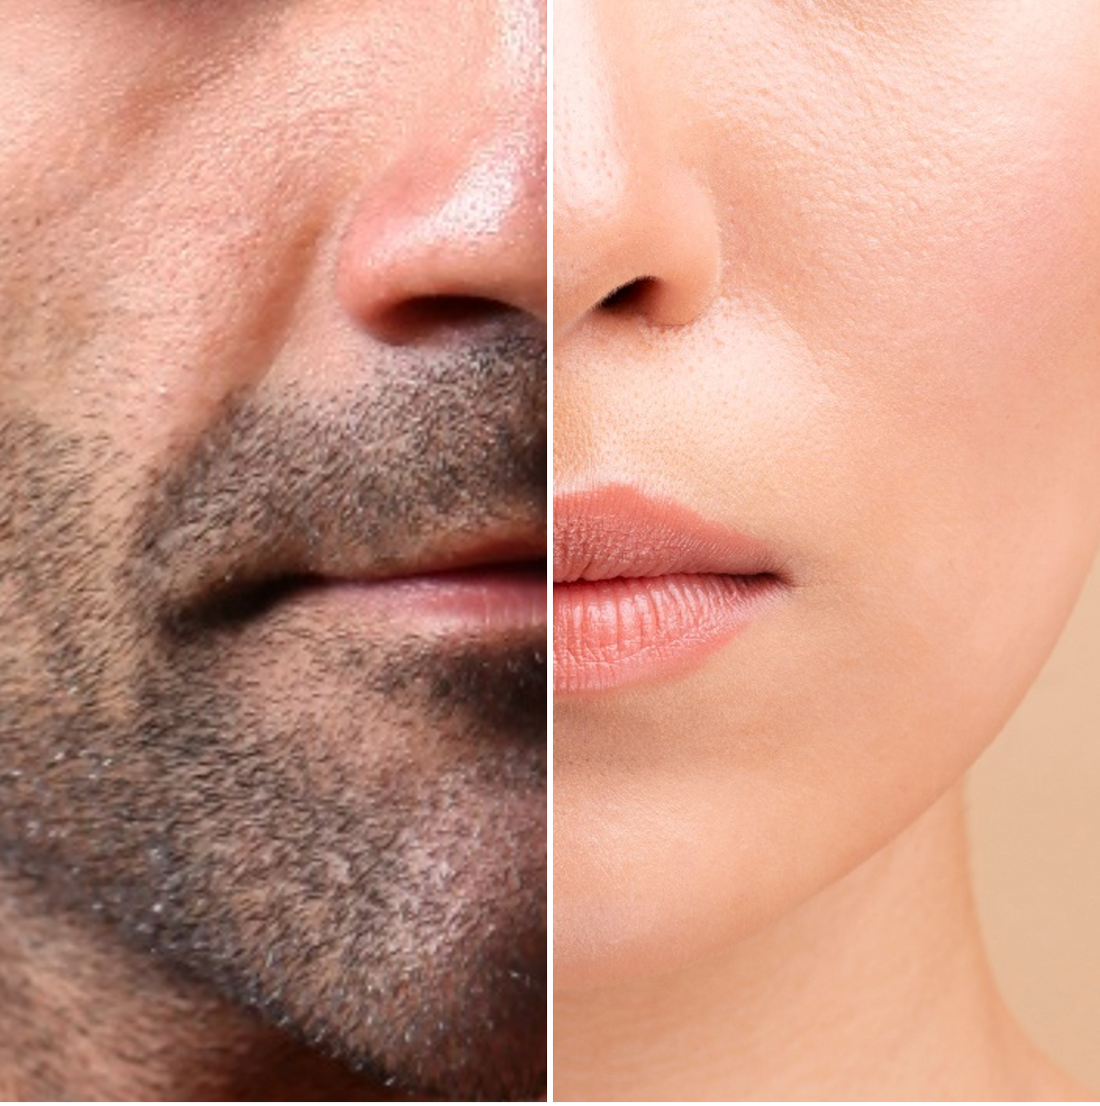 A man's skin and a woman's skin have a lot in common, but they also differ.